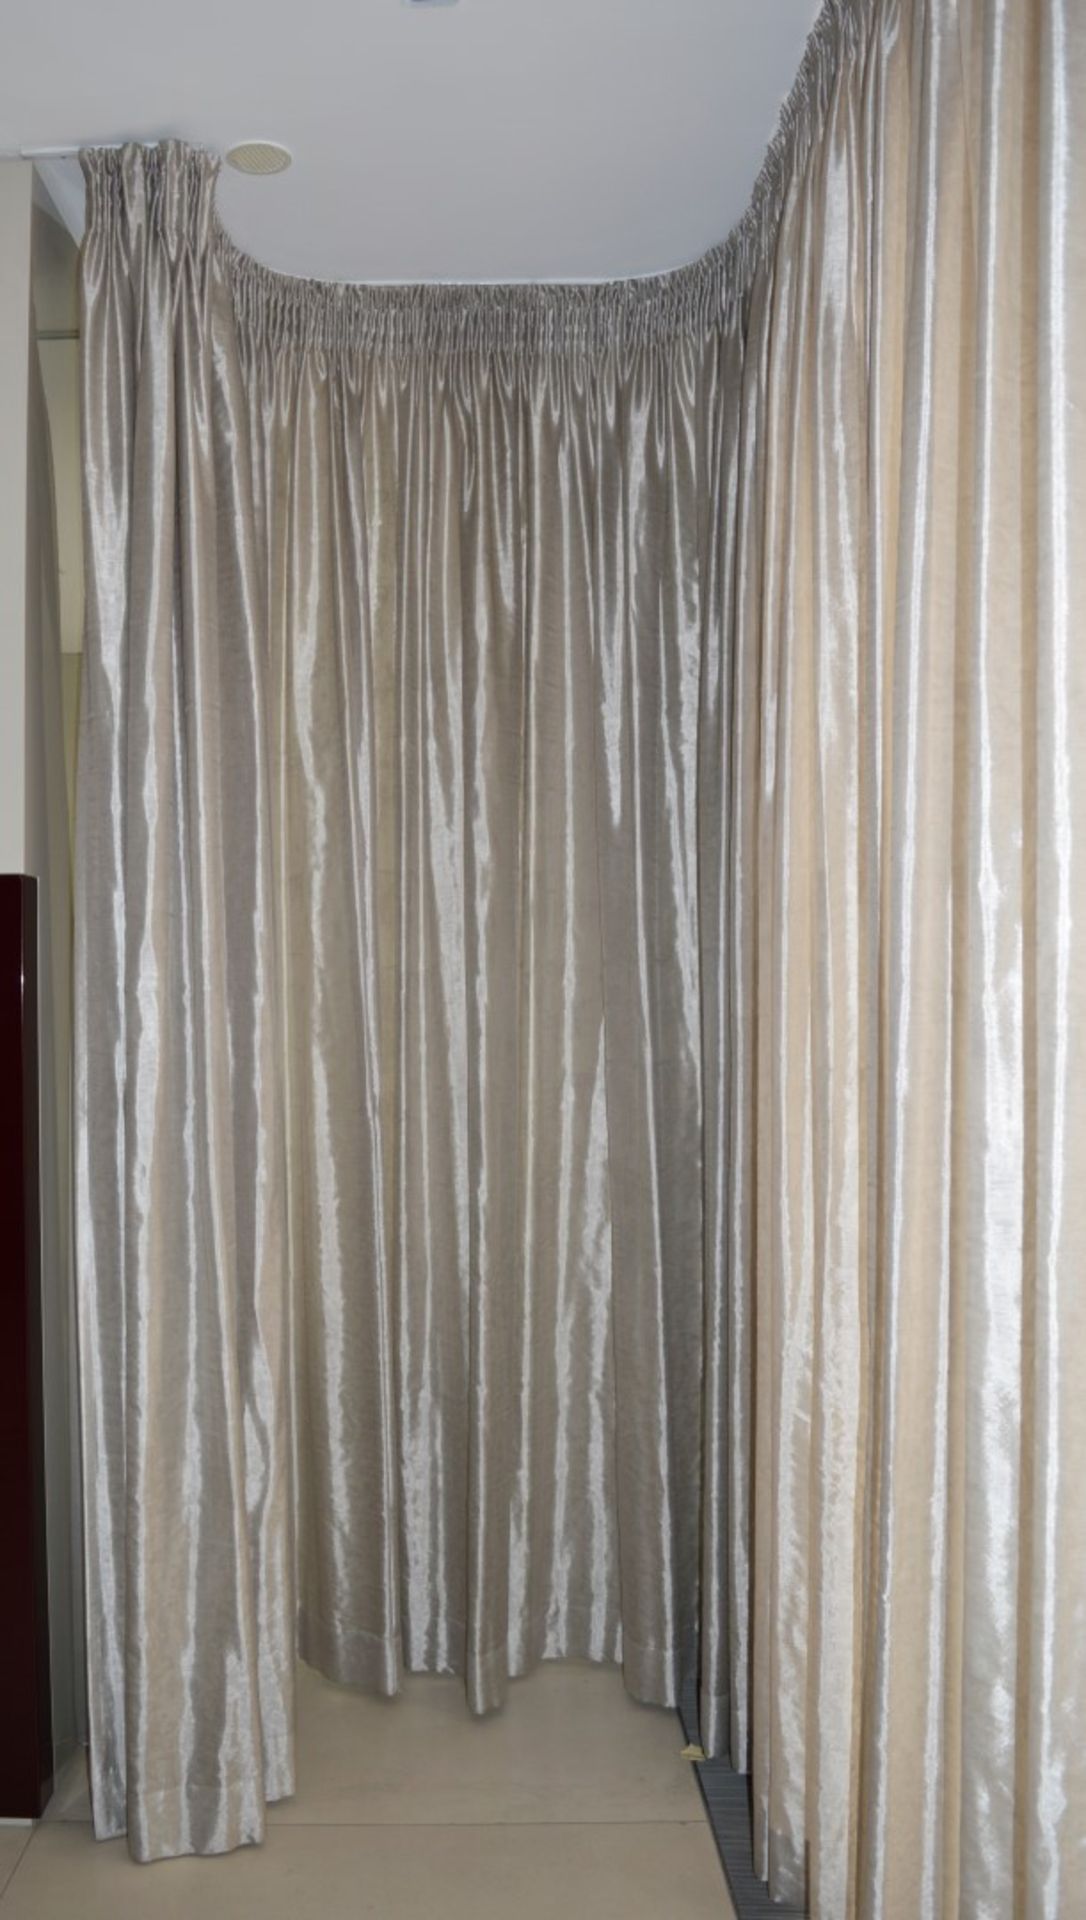 1 x Set of Curtains With Electric Motor - Ref 73 - Approx Length 800cm x Drop 307 cms - CL230 - - Image 3 of 7